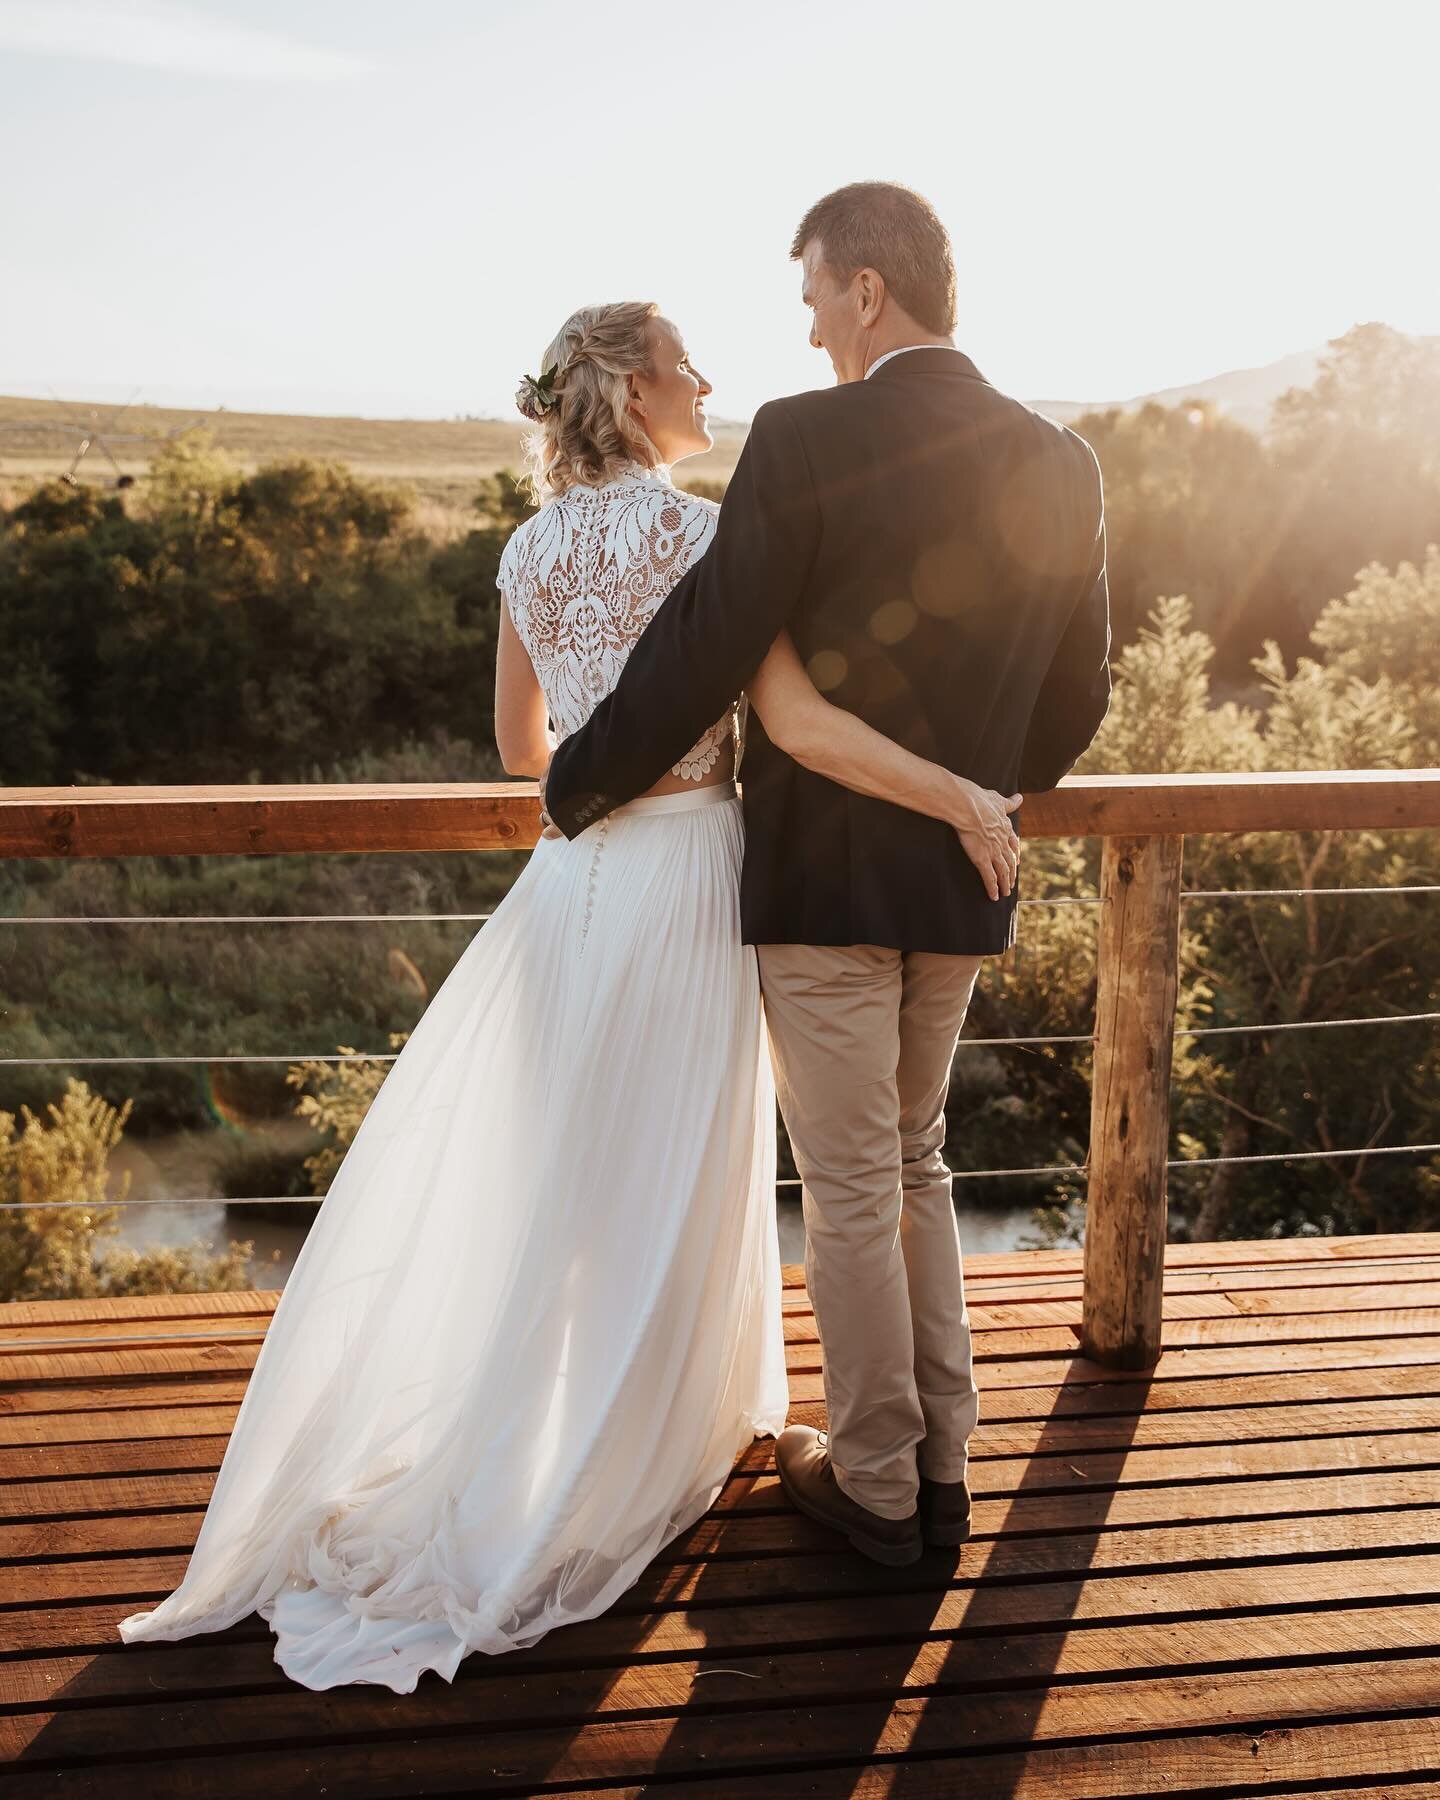 Rich &amp; Vix ✨
It&rsquo;s been a while since I&rsquo;ve had such a stunning sunset! More to follow 🖤

Venue - @tugelariverlodge 
&bull;
&bull;
&bull;
#weddingphotographer #groom #bride #instawedding  #bridetobe #lovestory #weddinginspiration  #mar